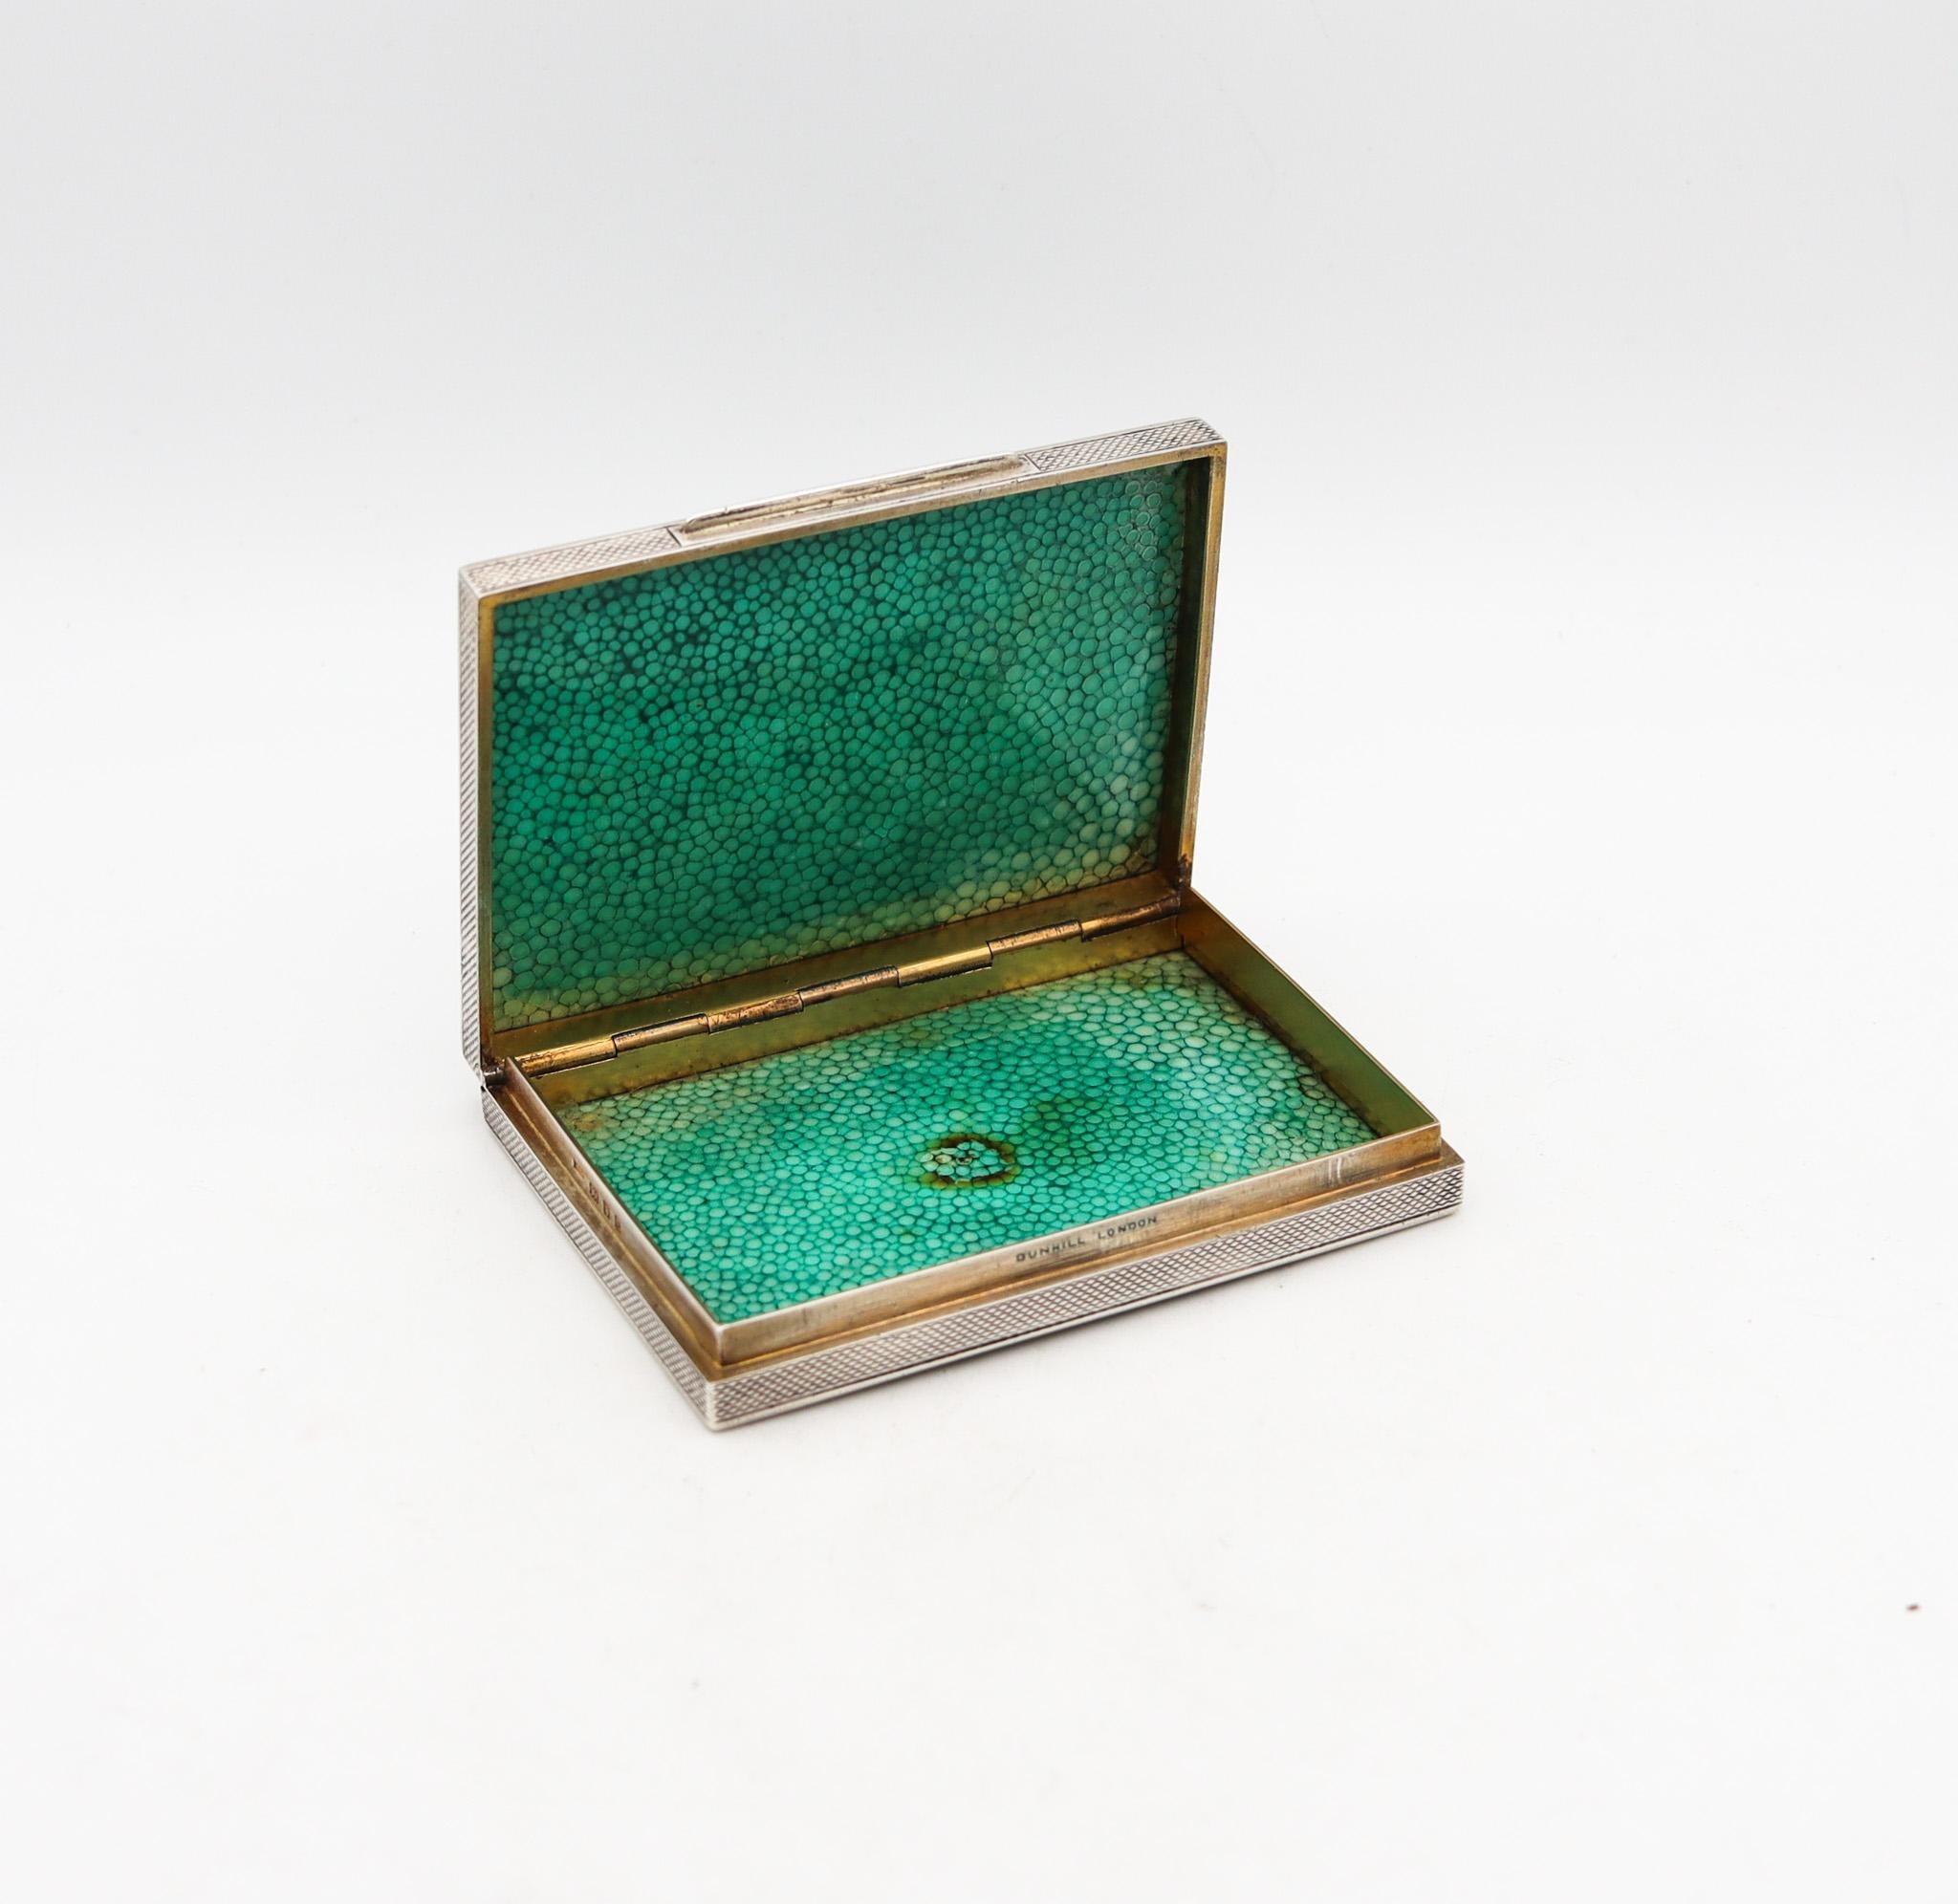 Gilt Alfred Dunhill 1940 London Rectangular Box Case In .925 Sterling And Shagreen